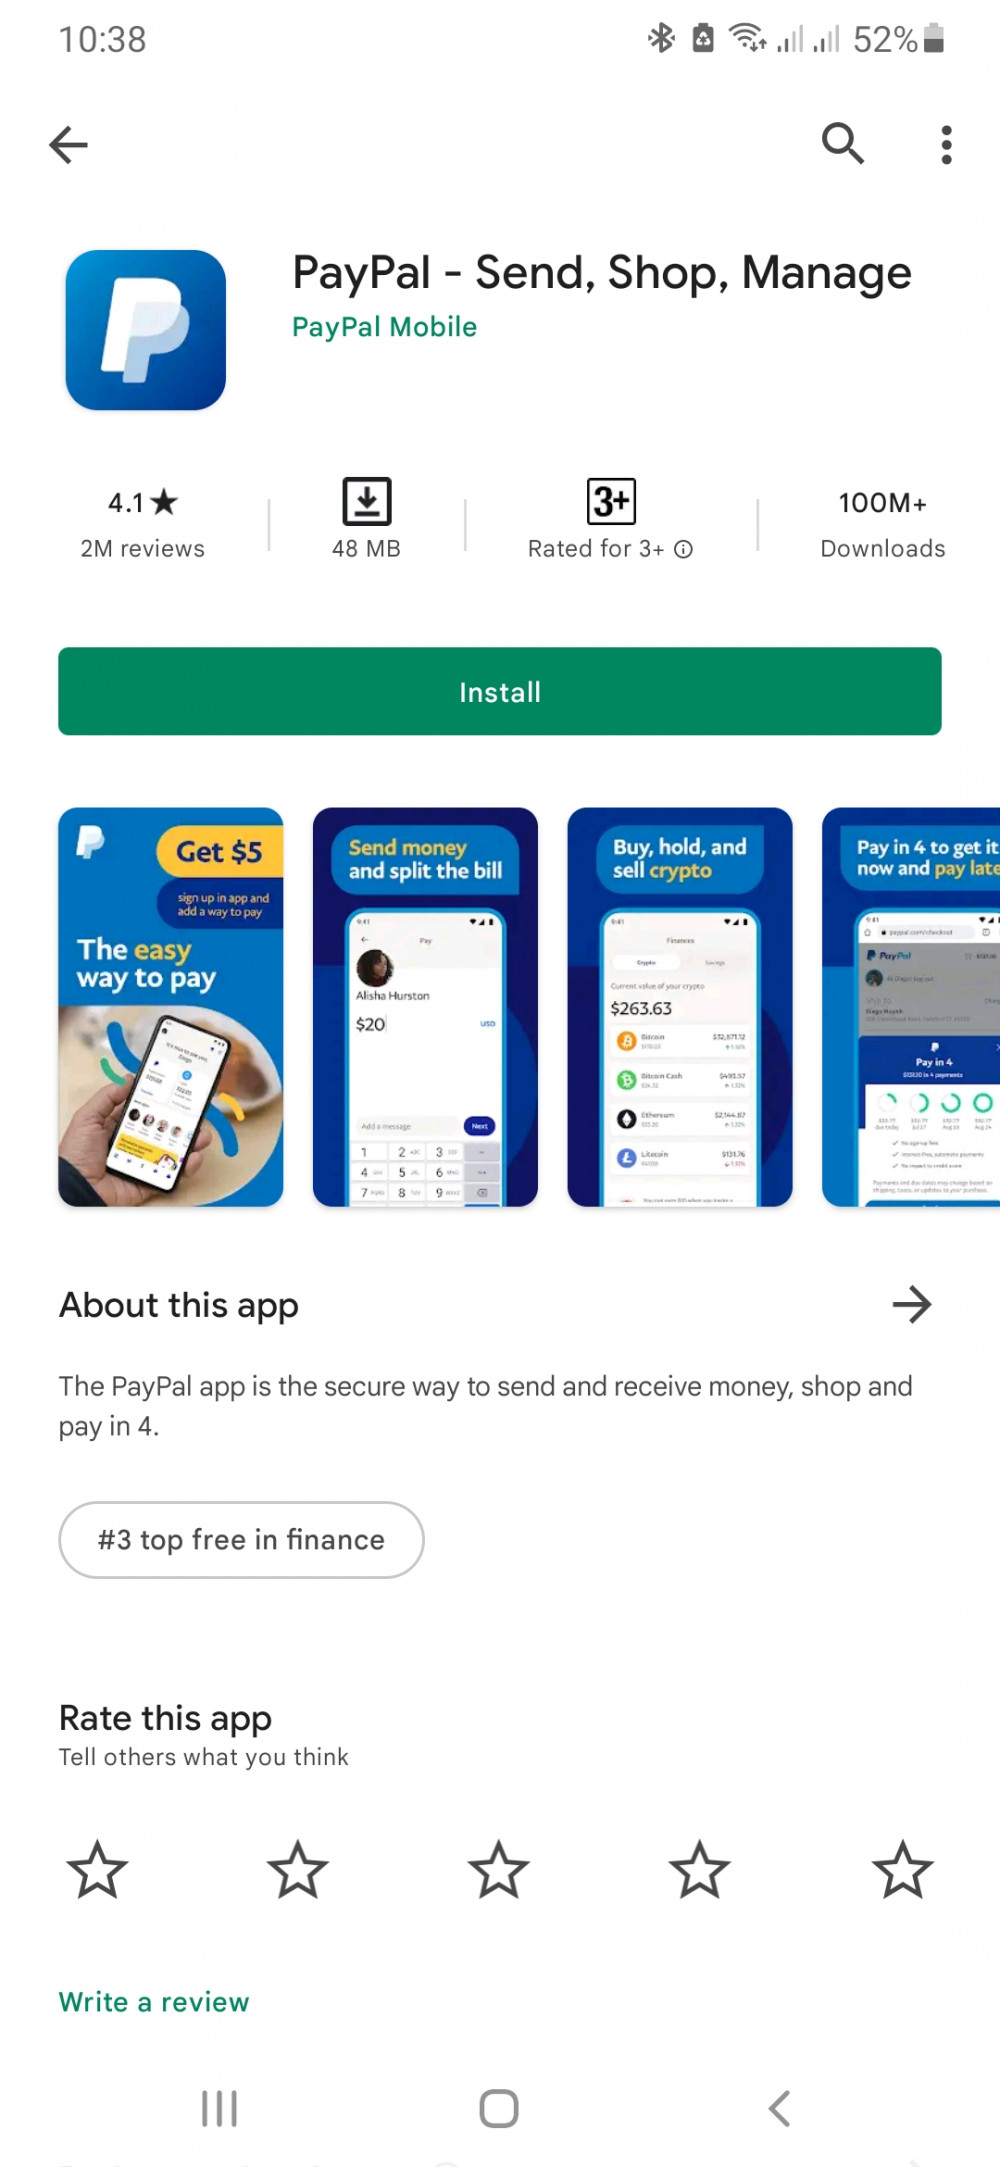 PayPal app on Google Play Store